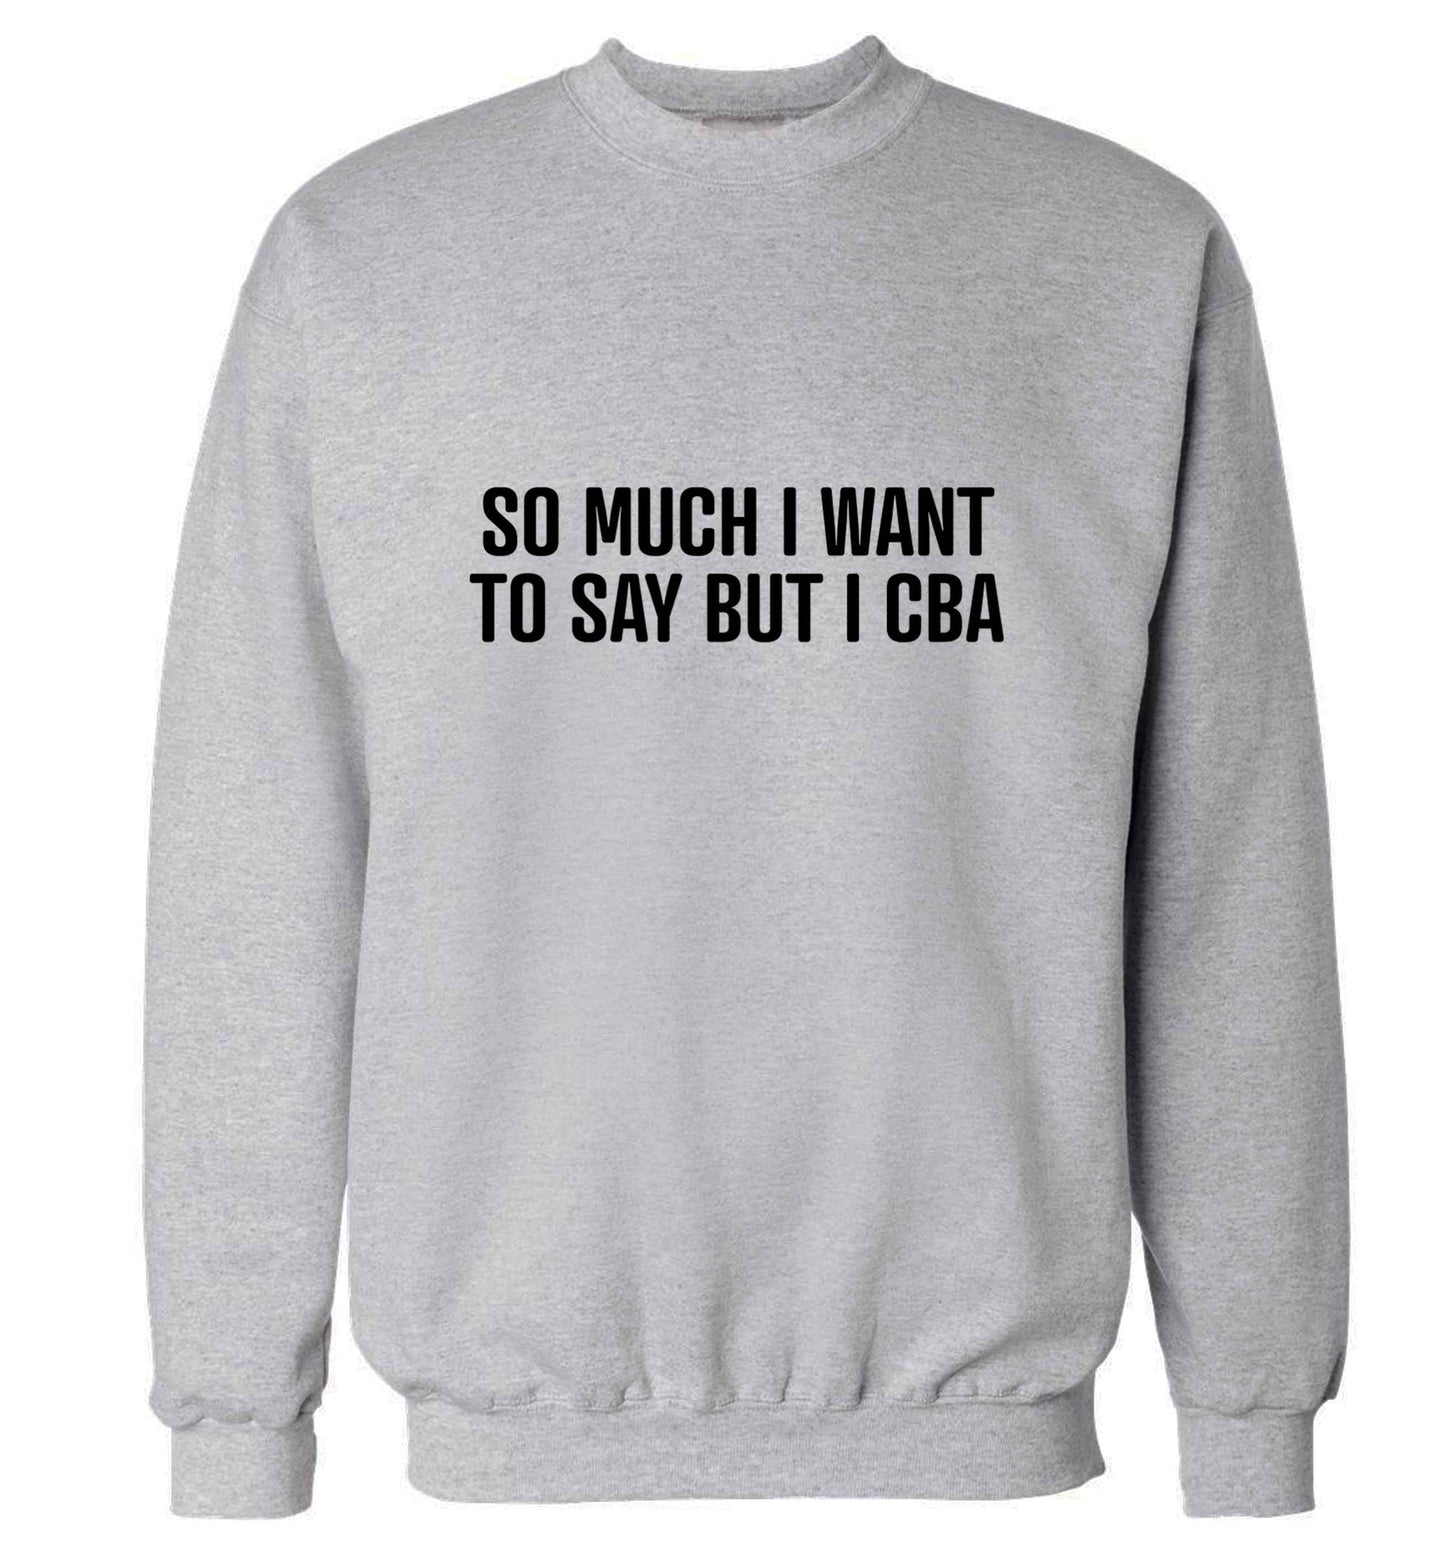 So much I want to say I cba  adult's unisex grey sweater 2XL